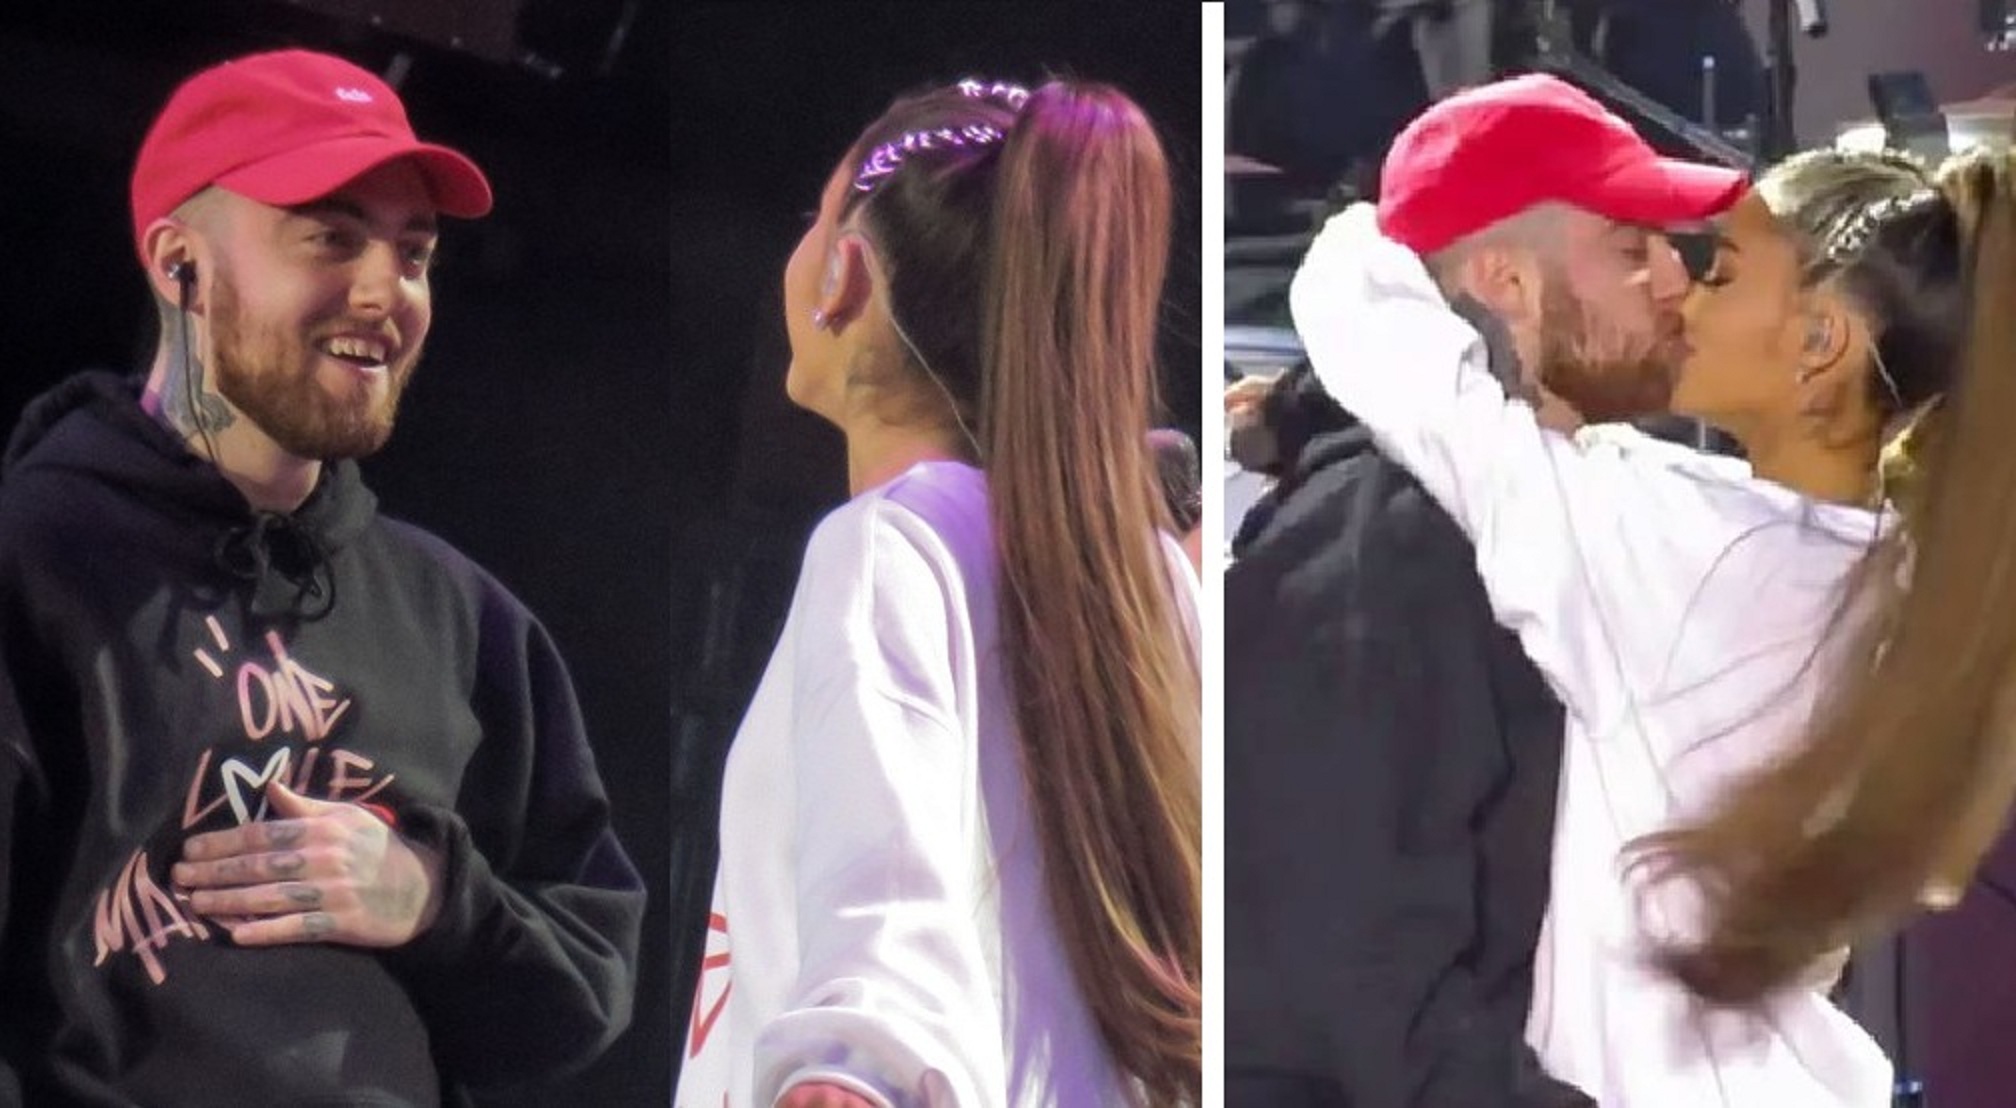 Watch: Mac Miller’s Last Performance with Ariana Grande at ‘One Love Manchester ...